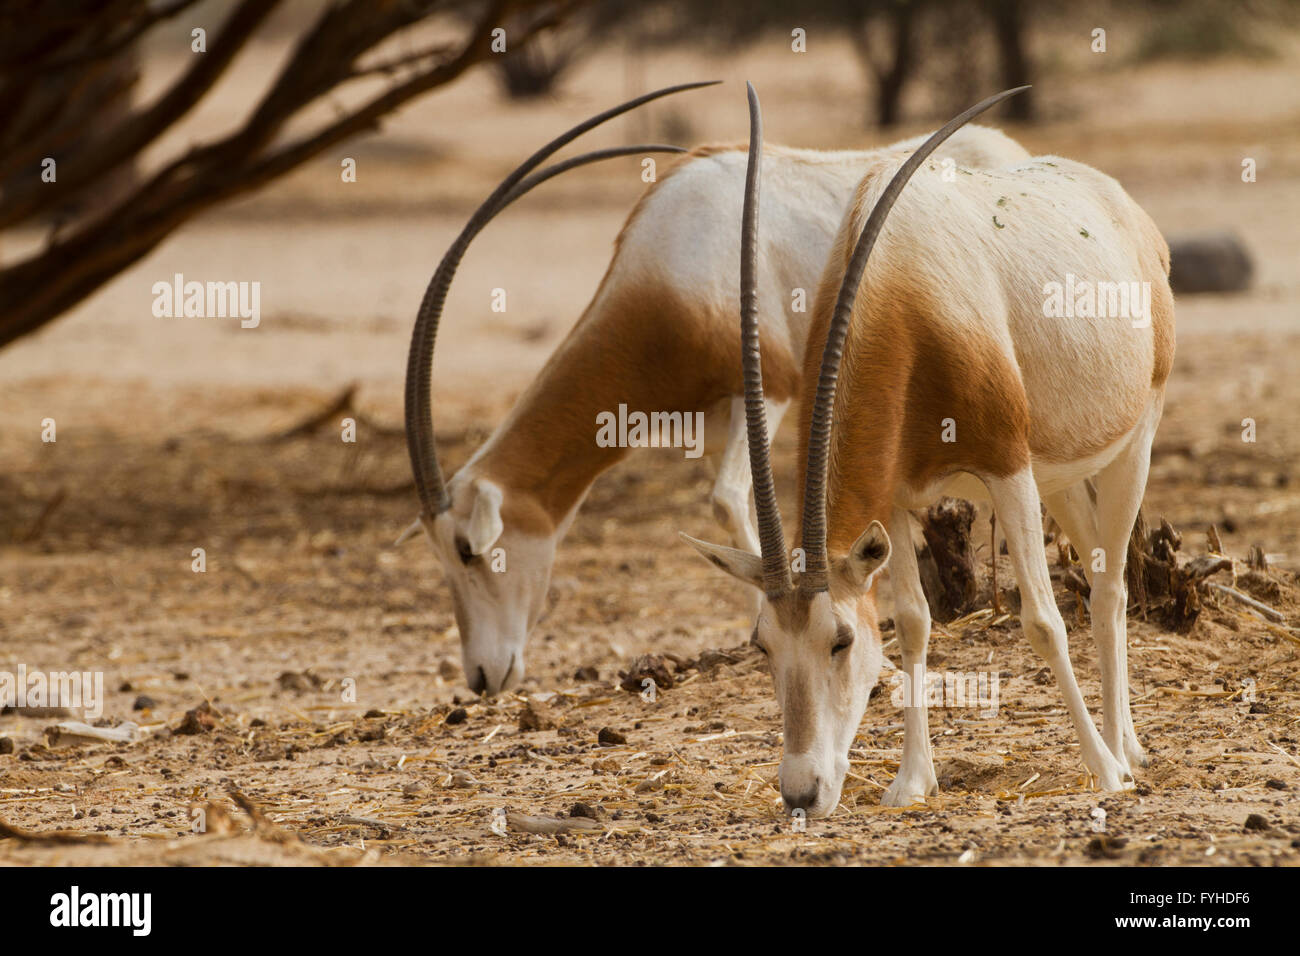 Israel, Aravah desert, A Herd of Scimitar Oryx or Scimitar-horned Oryx (Oryx dammah), also known as the Sahara oryx, is a specie Stock Photo